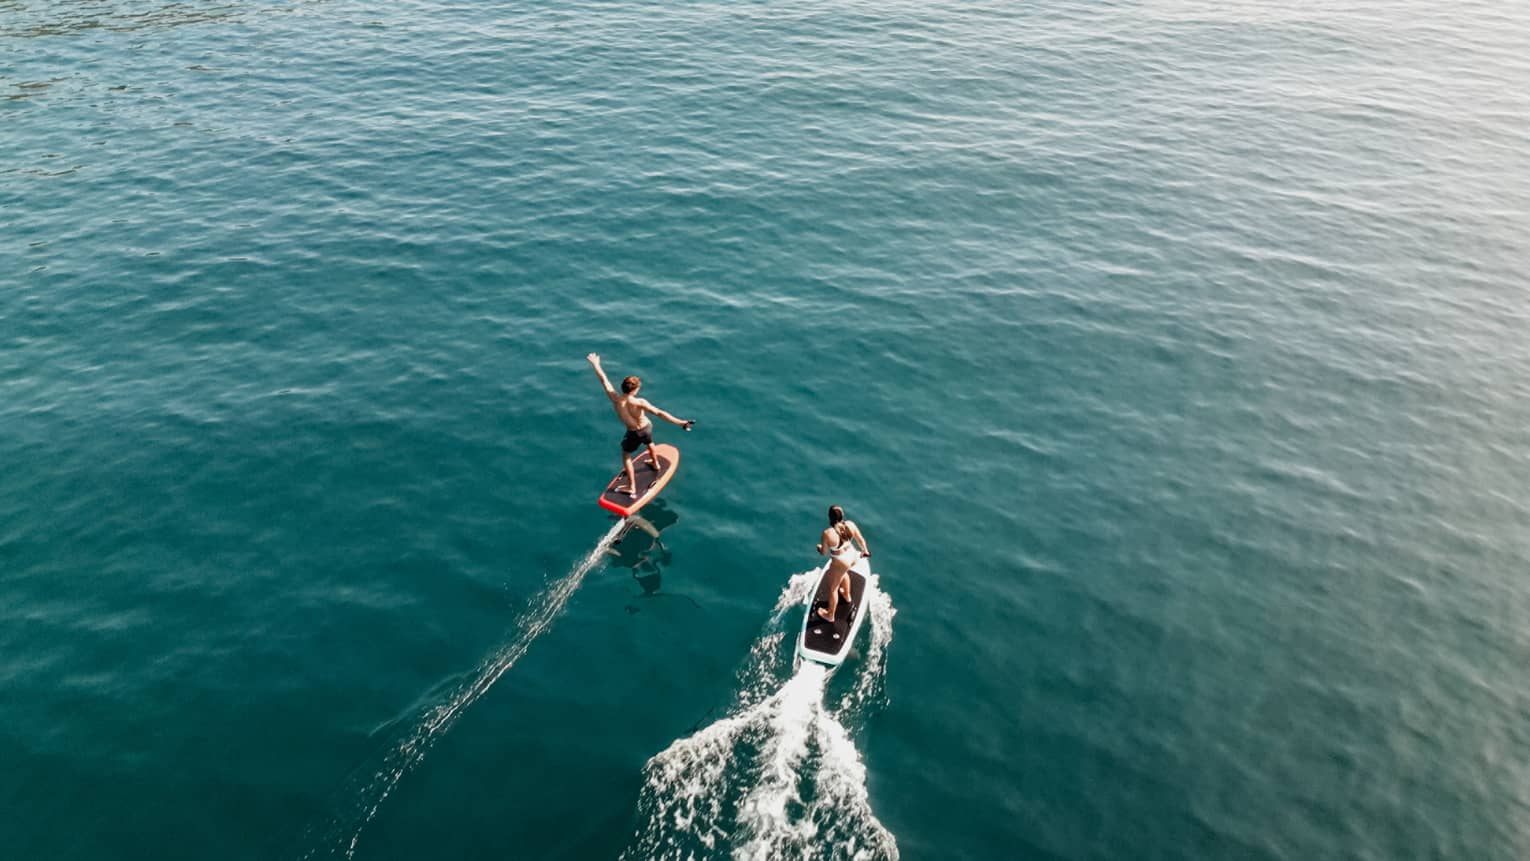 Aerial view of two people riding e0foil surfboards on blue-green water